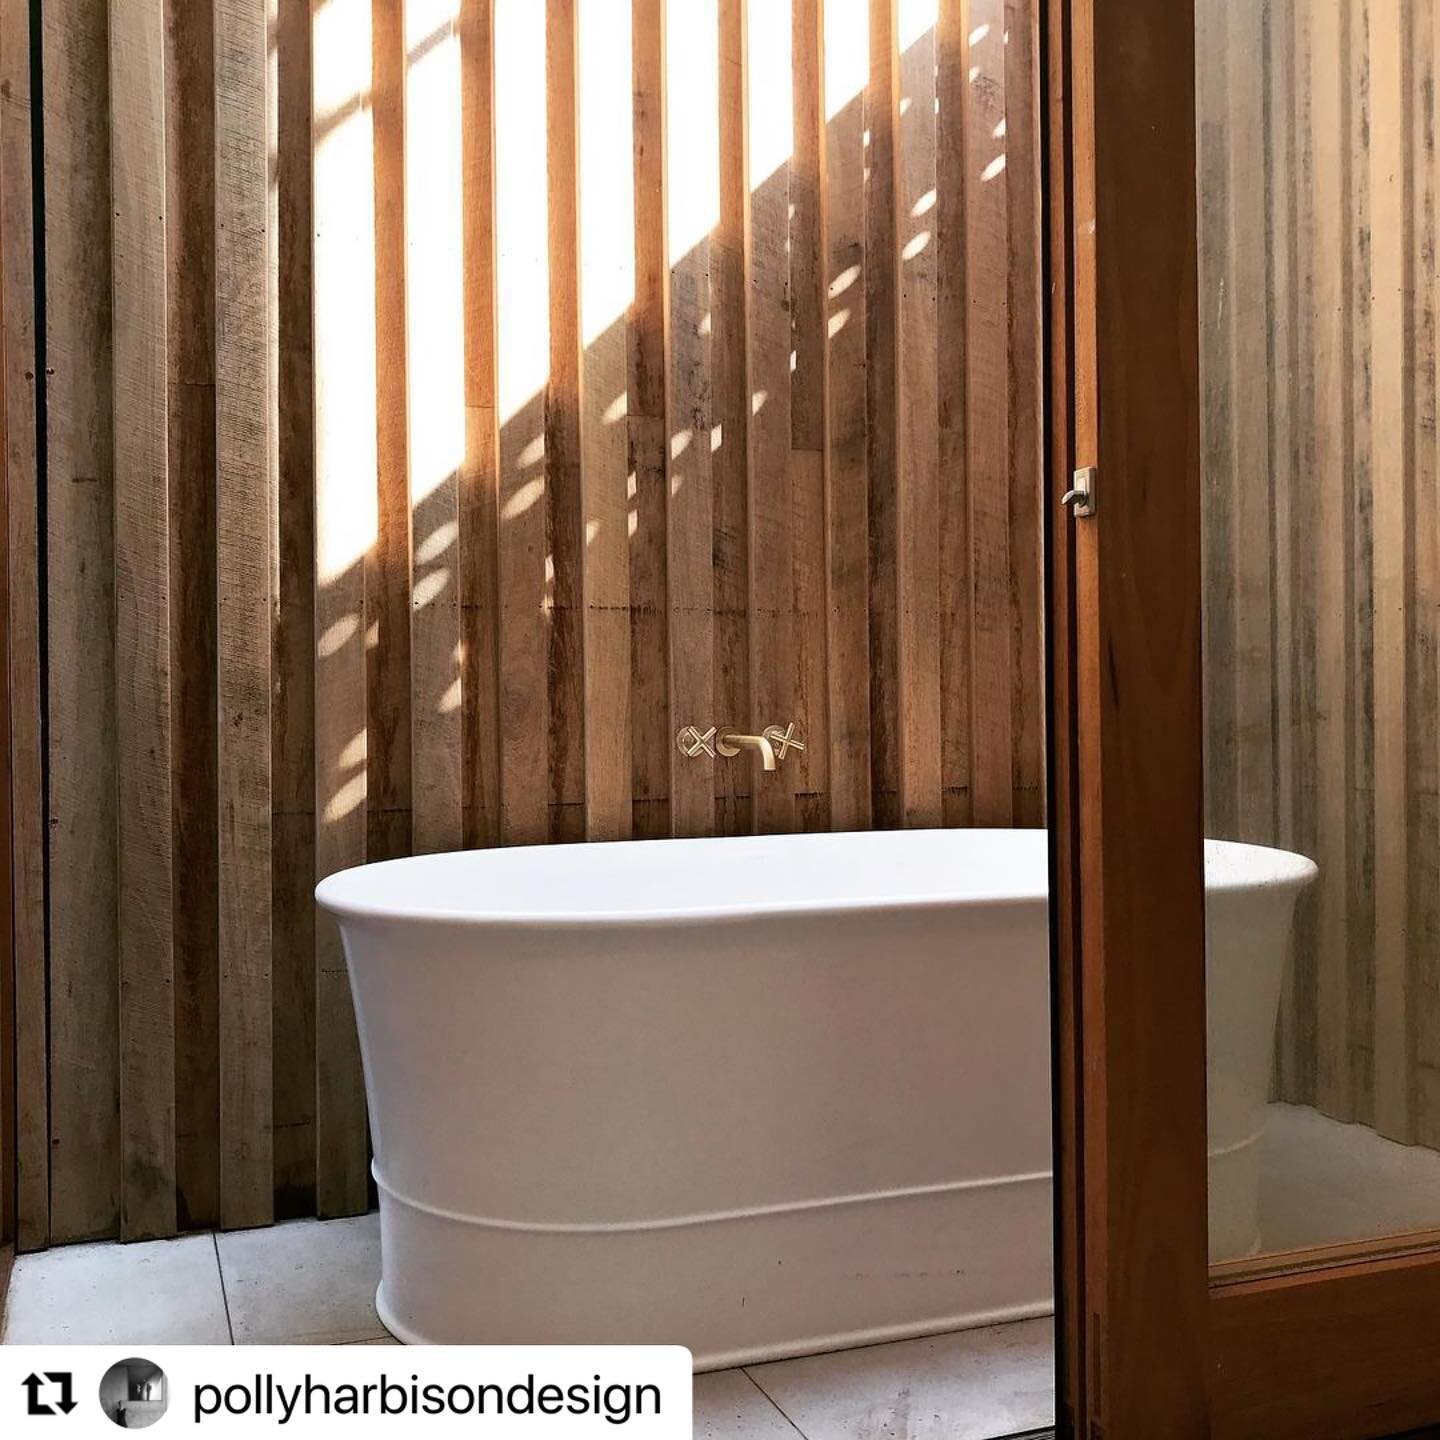 #Repost @pollyharbisondesign with @make_repost
・・・
Friday site visit Copacabana House nearing completion..... in the mad push to the finish line, people, boxes, appliances all over the place .... but still a sense of calm in the ensuite..... thanks a